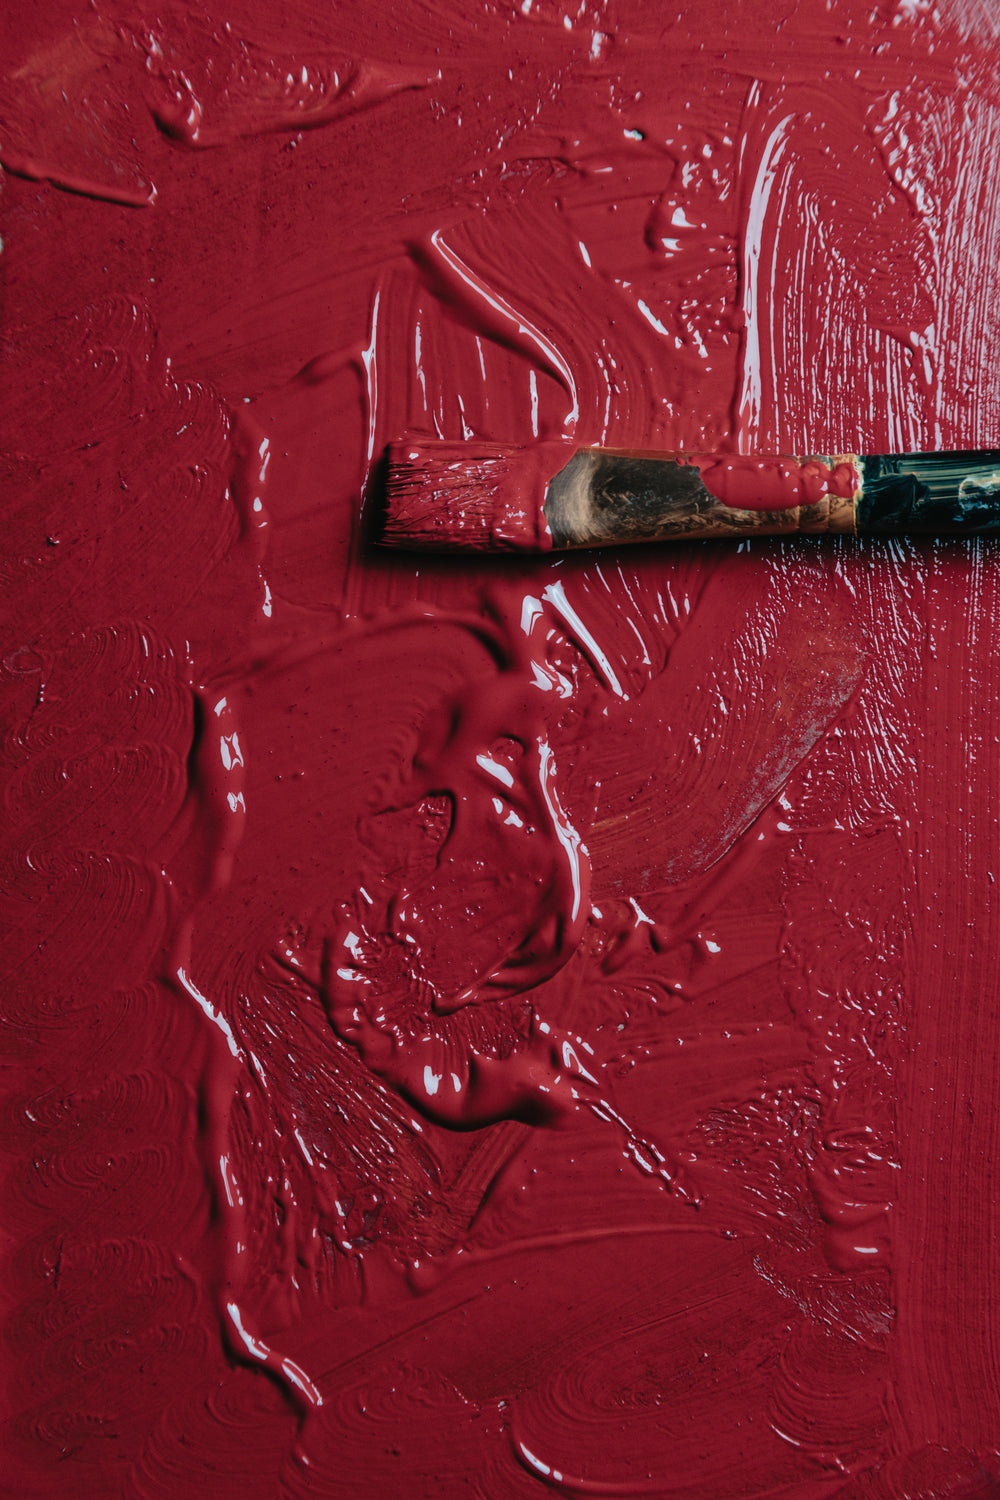 wet red paint with a paint brush laying on it